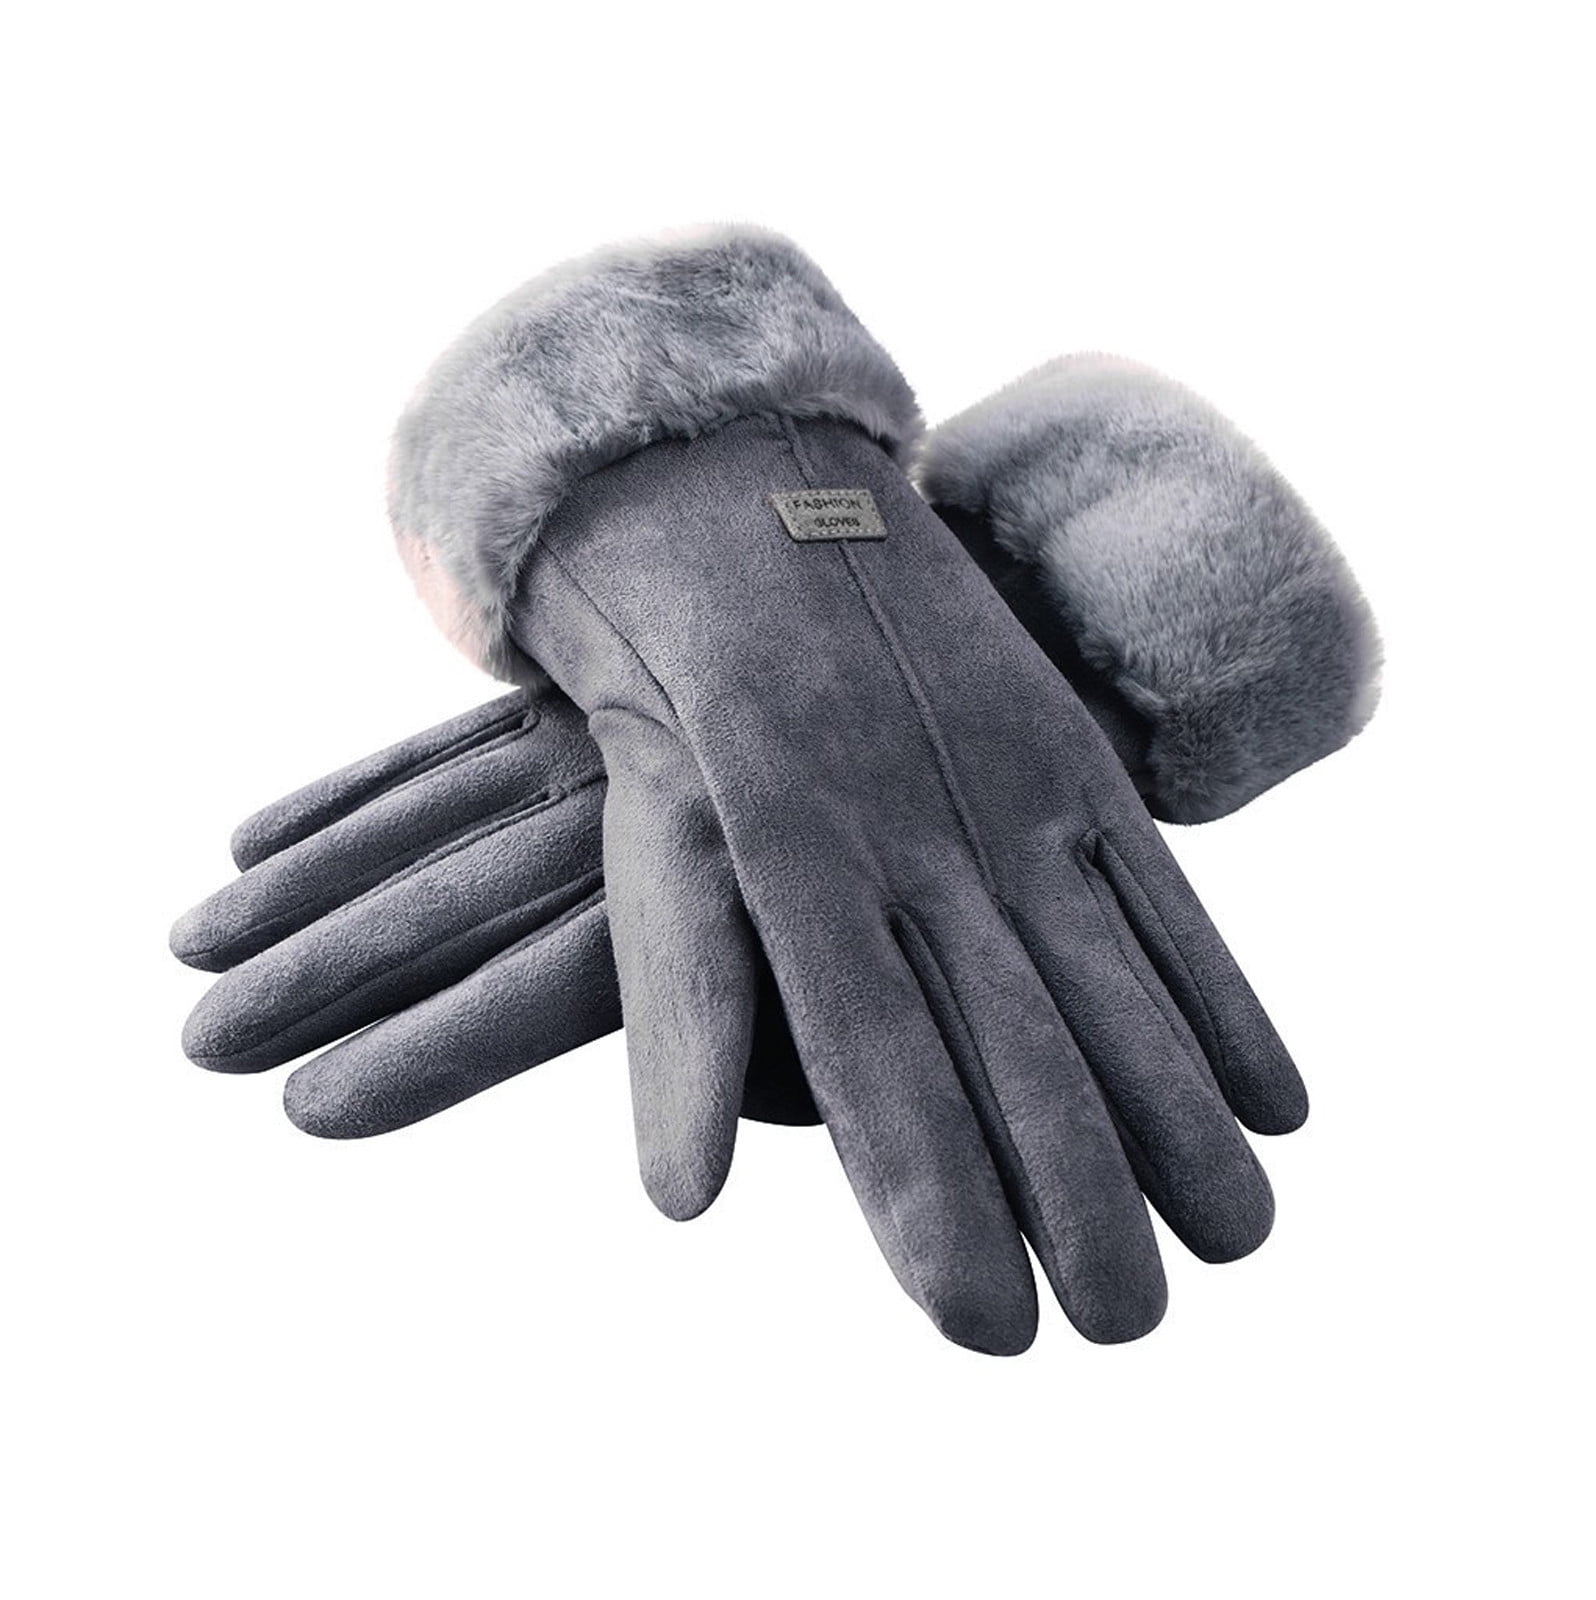 Picture Wrigley Gloves Men's Gloves Winter Mitts Mittens